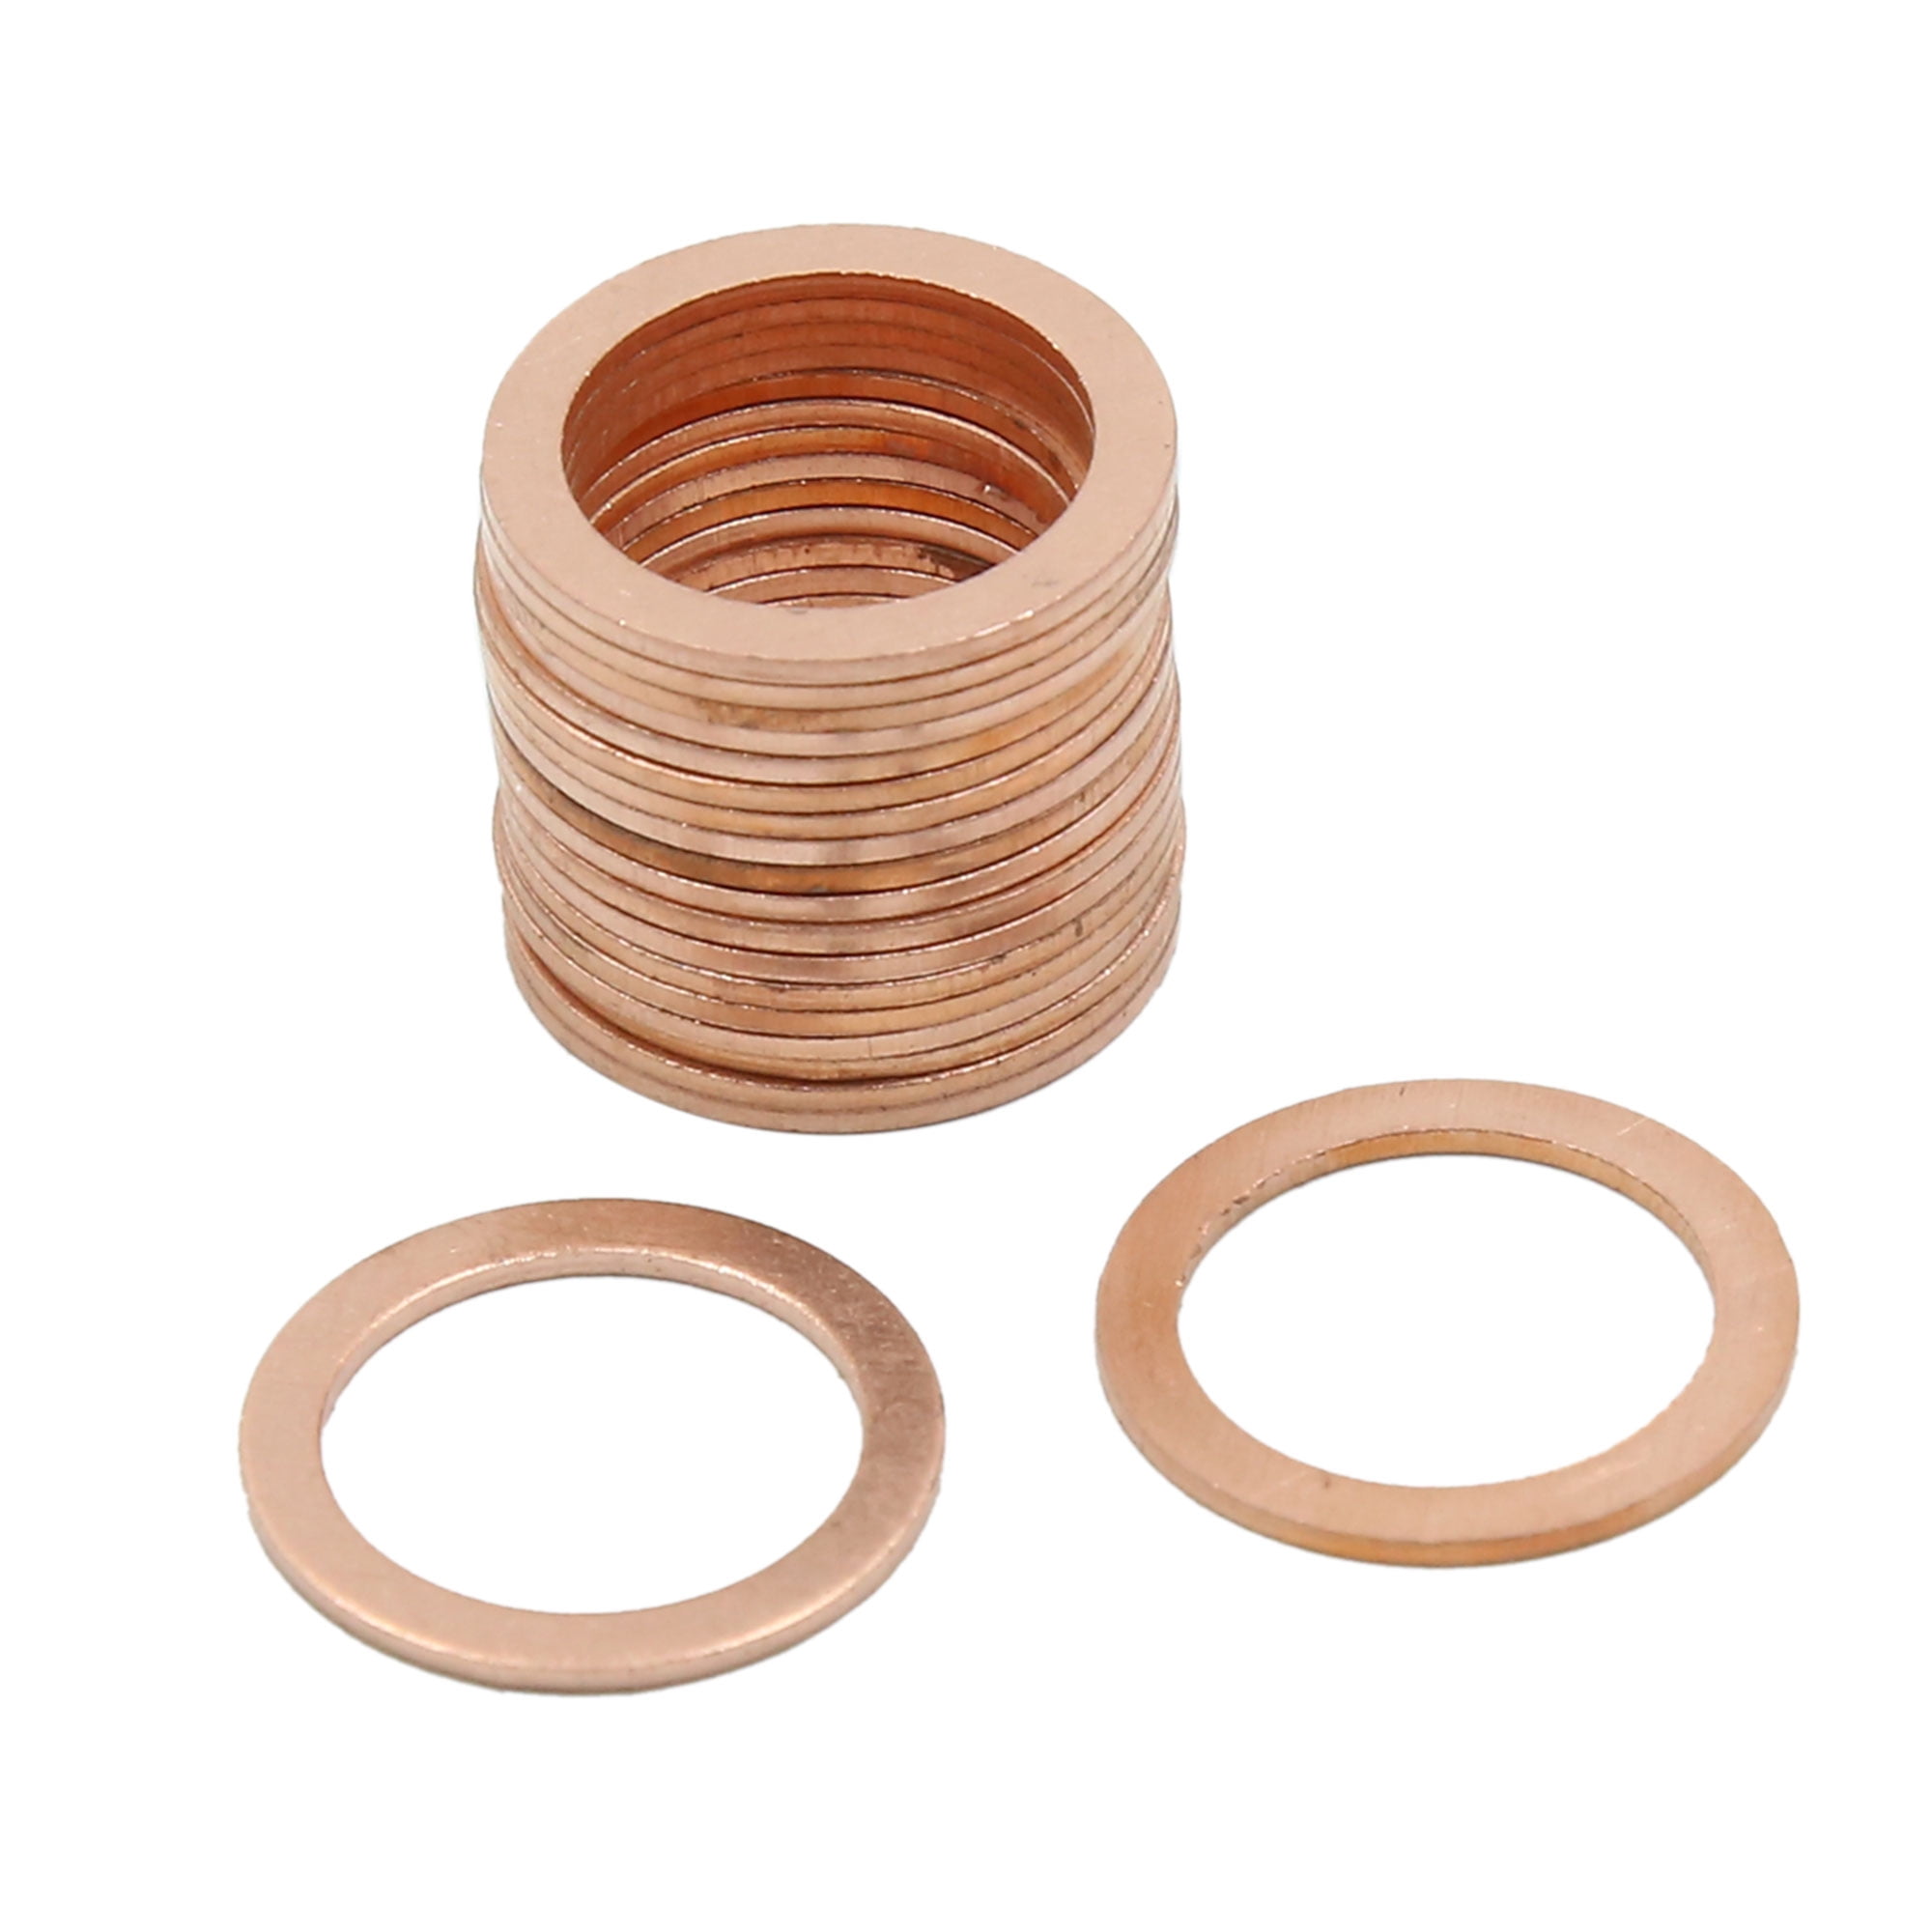 Details about   10 x 7/16" UNF Copper Washers Drain Sump Plug Seal Ring Hydraulic 12.2x16.4x1.2 